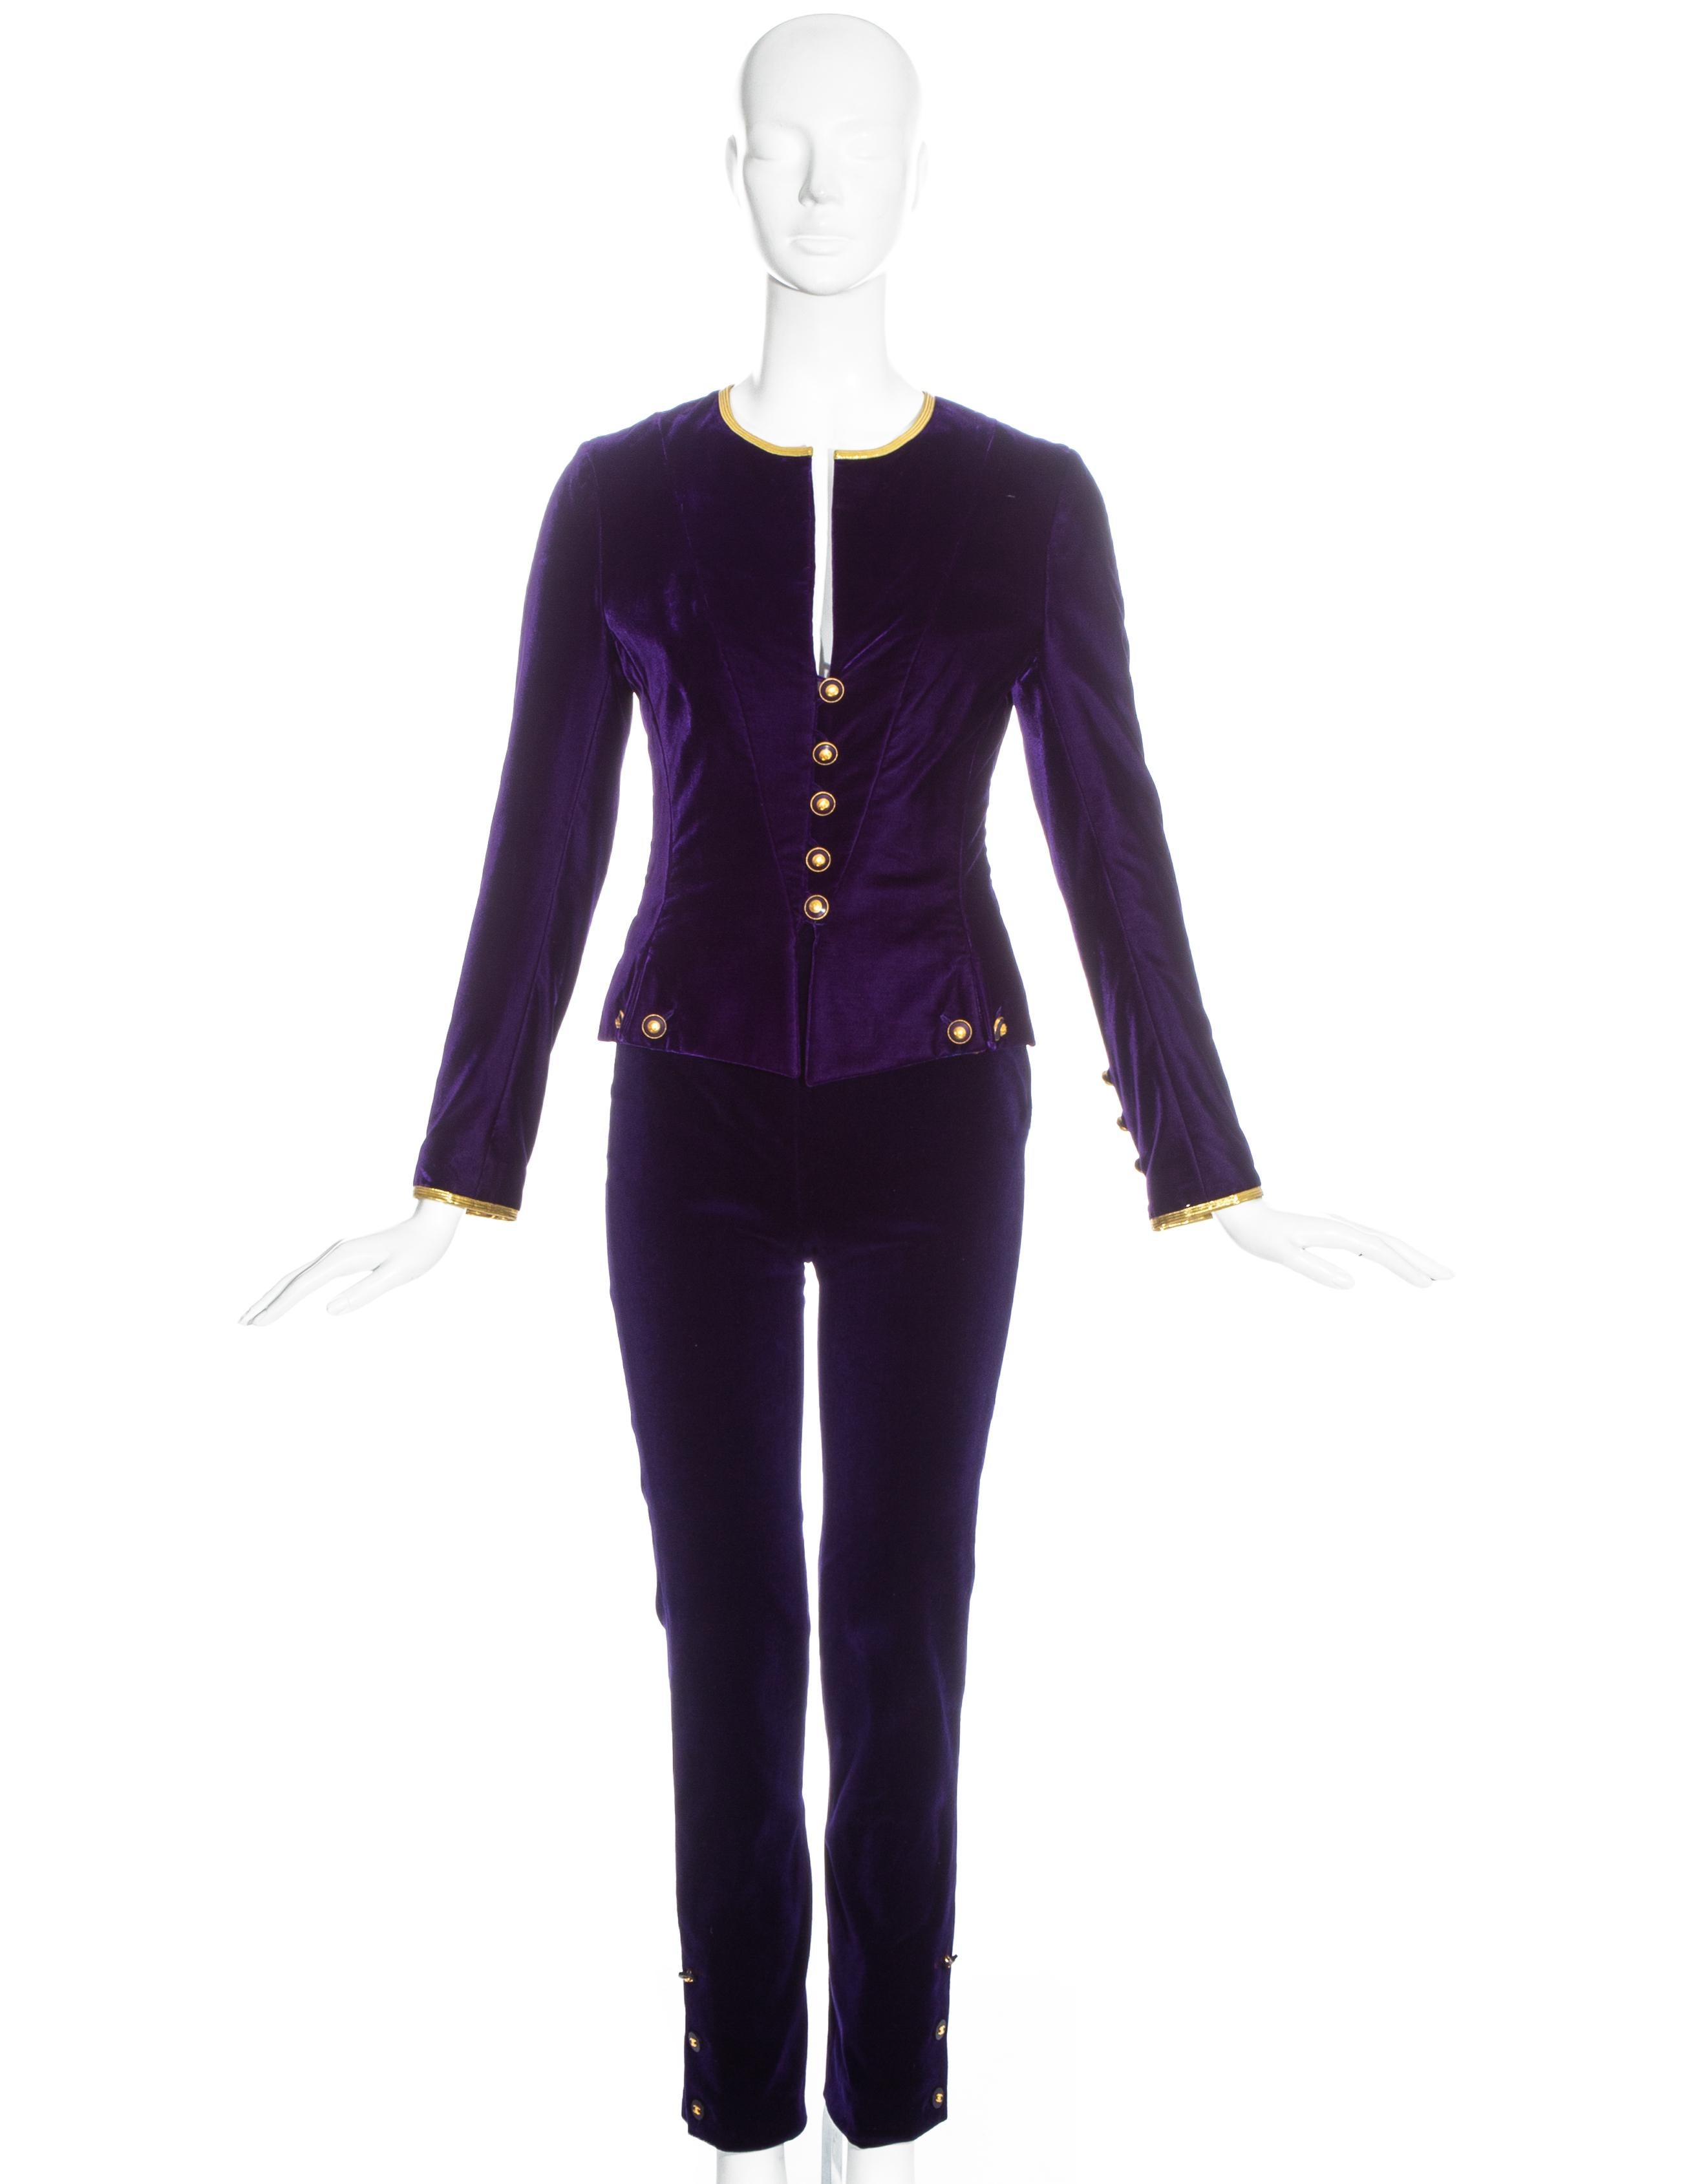 Chanel by Karl Lagerfeld, purple velvet pant suit comprising: fitted jacket with metallic gold trim, gold chanel button closures and silk lining; high waisted fitted pants with chanel button closures on the side. 

Fall-Winter 1993